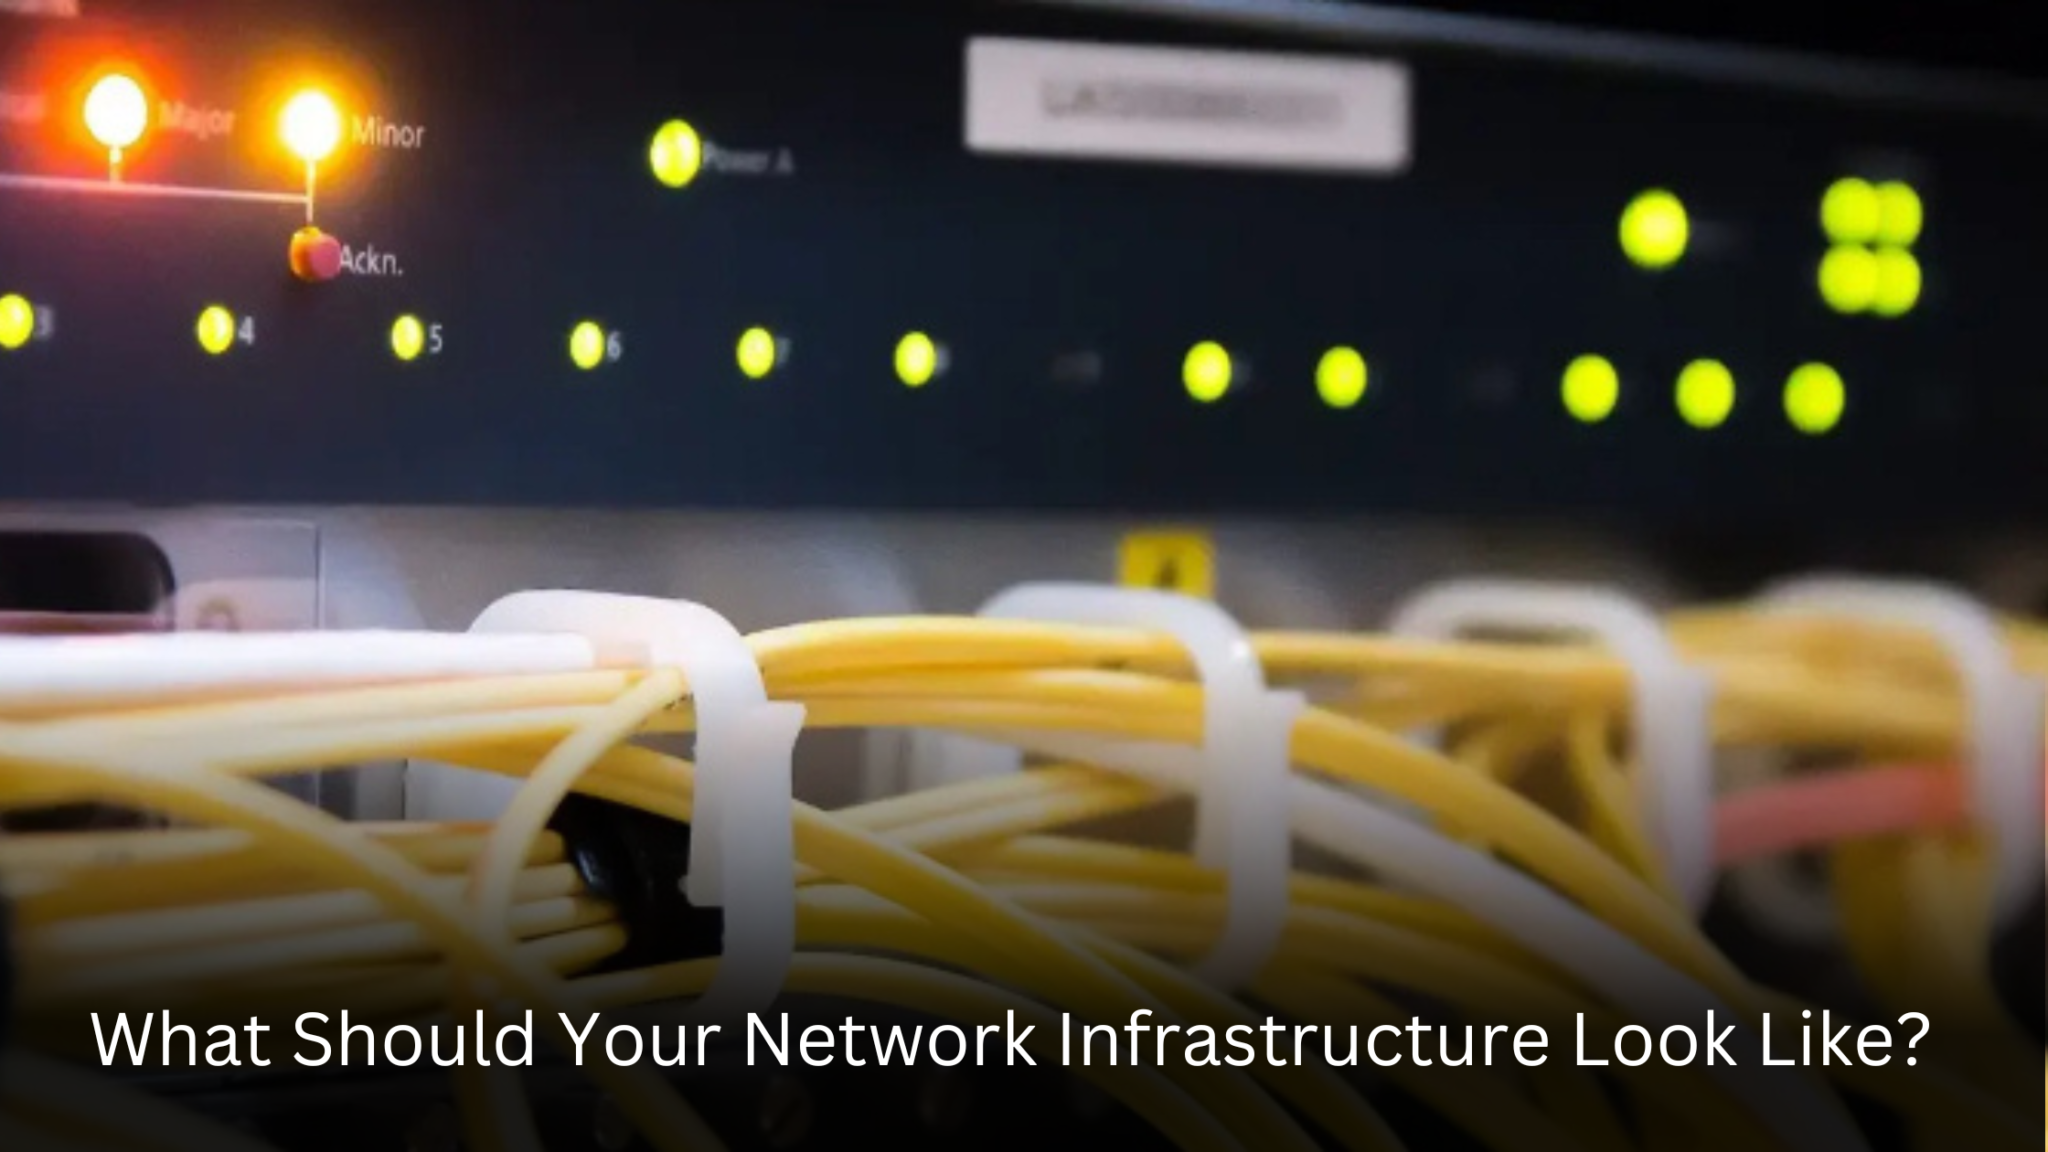 What Should Your Network Infrastructure Look Like?